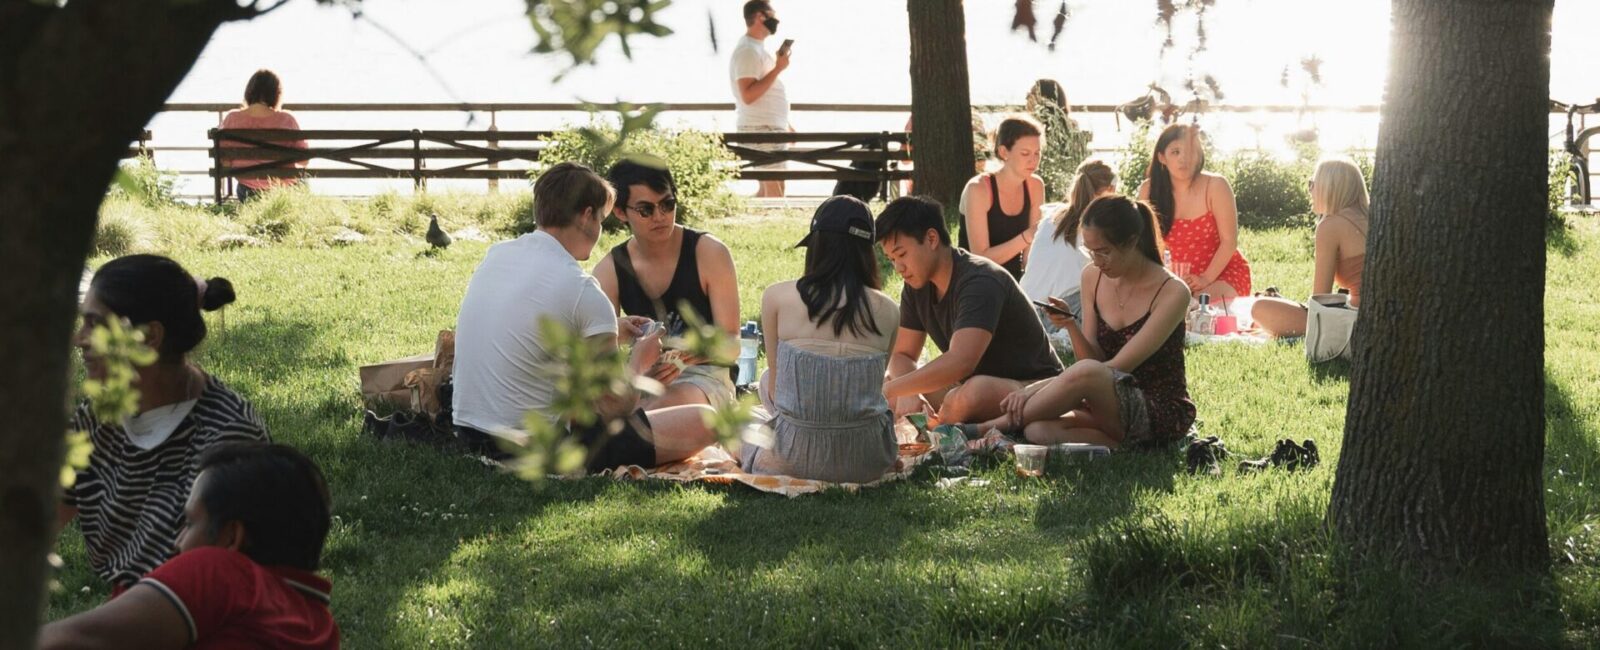 A group of people sitting under shade on a sunny day talking and eating.